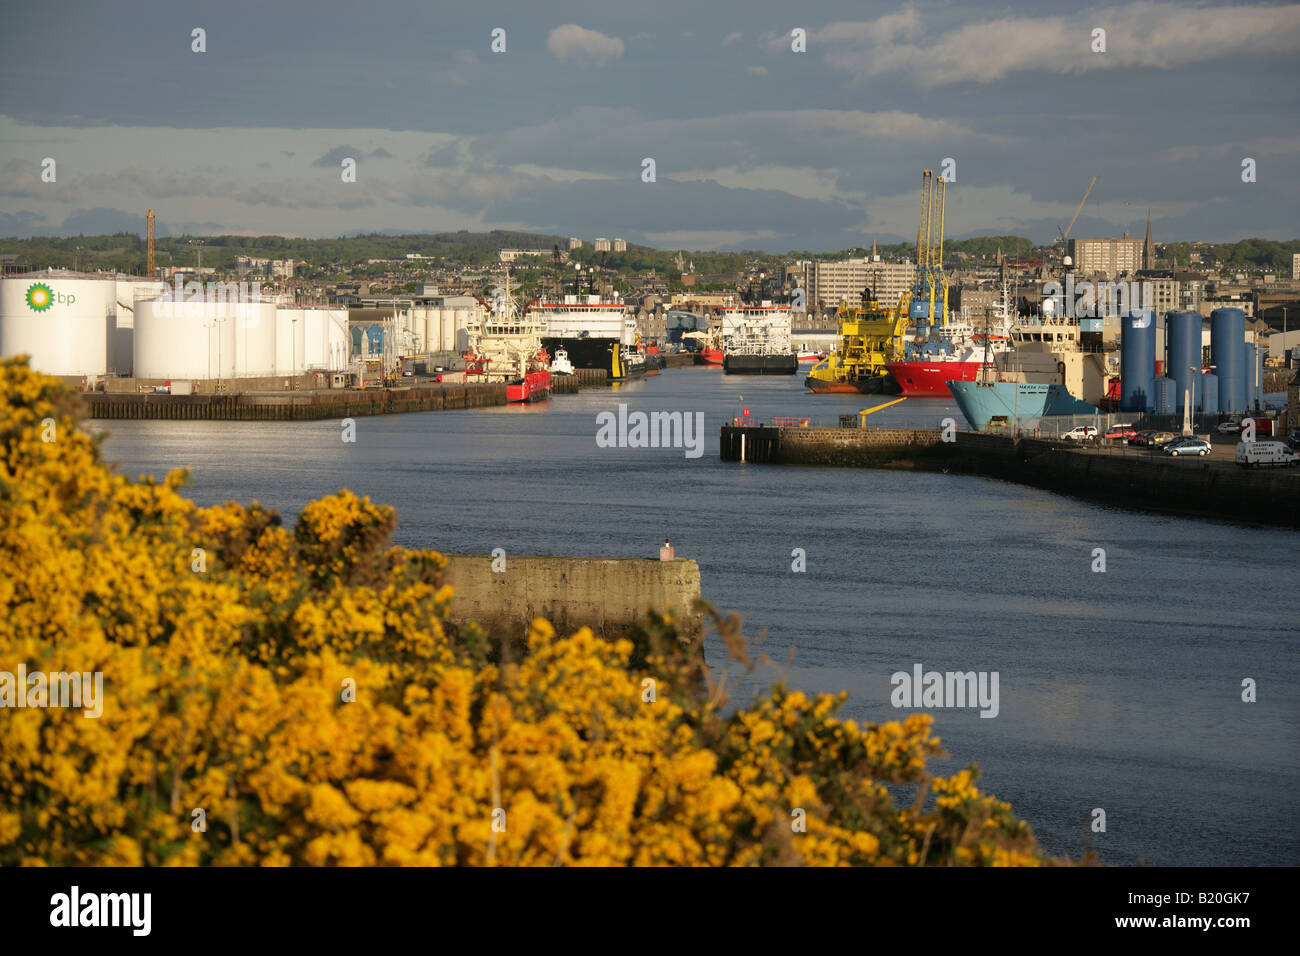 City of Aberdeen, Scotland. Morning view of Aberdeen Harbour with fishing boats and oil support ships berthed in the background. Stock Photo